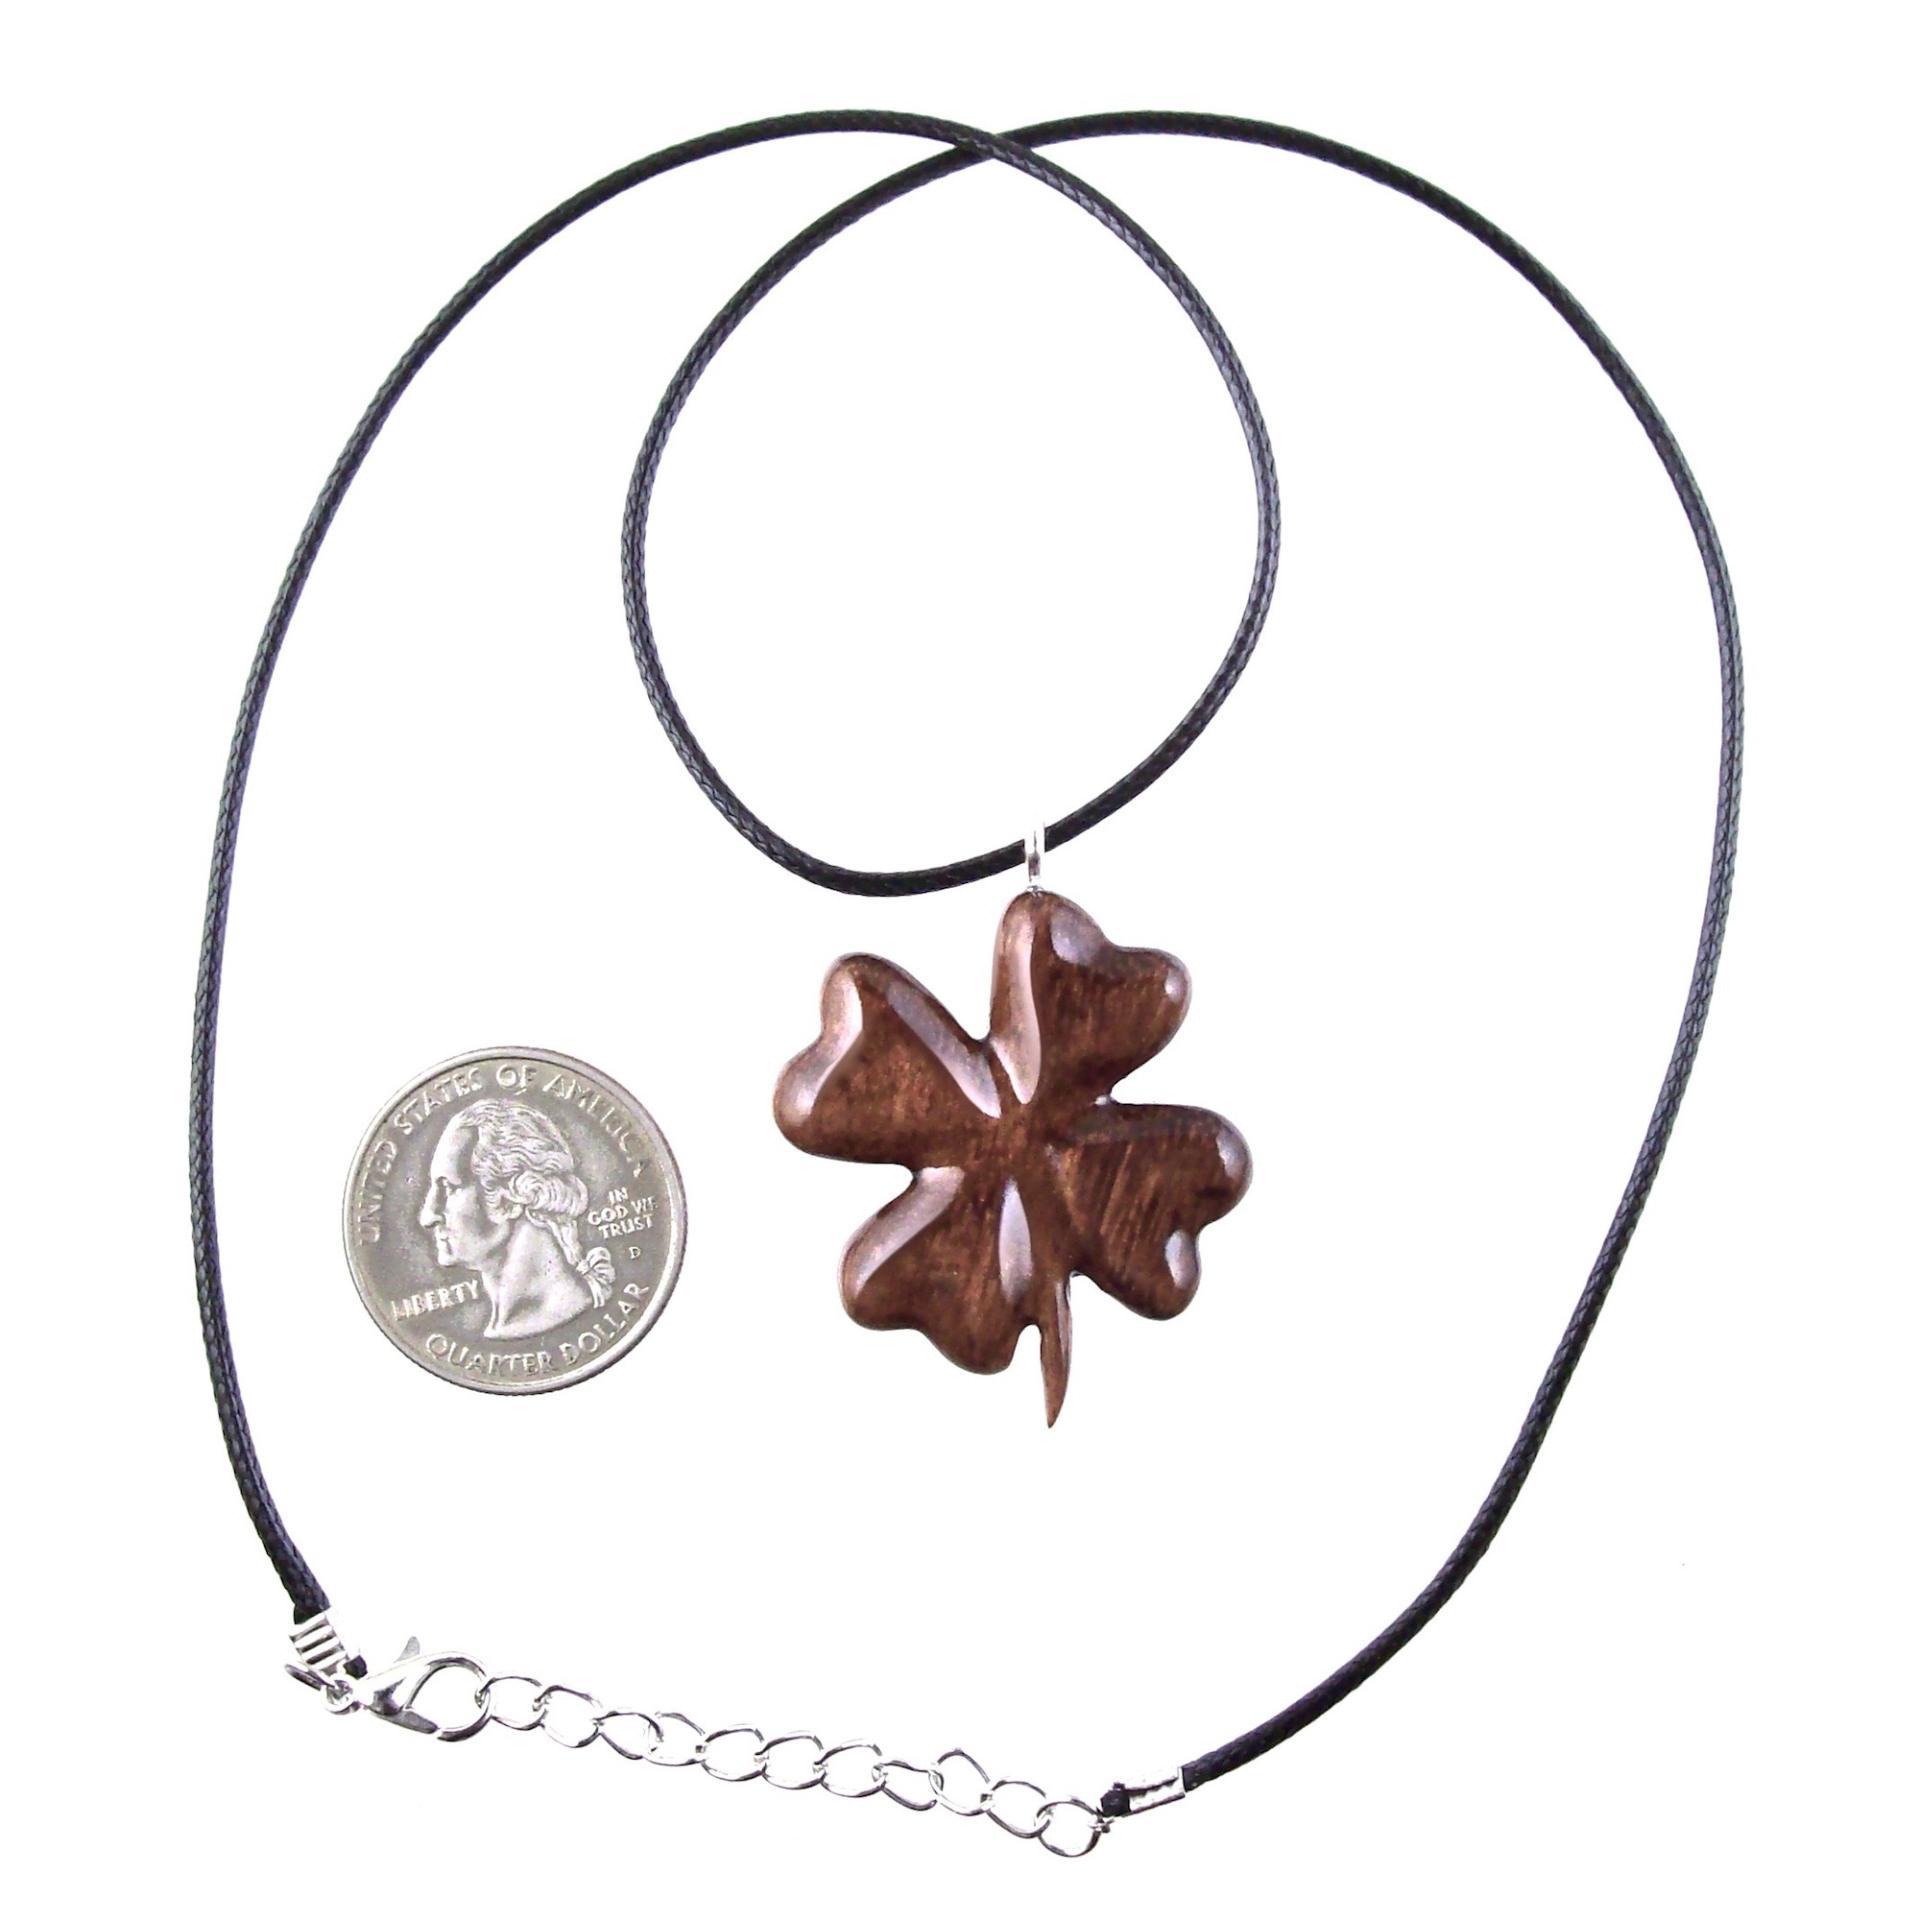 Hand Carved Four Leaf Clover Necklace, Wooden Shamrock Pendant, Lucky Charm Amulet, Good Luck Wood Jewelry Gift for Her